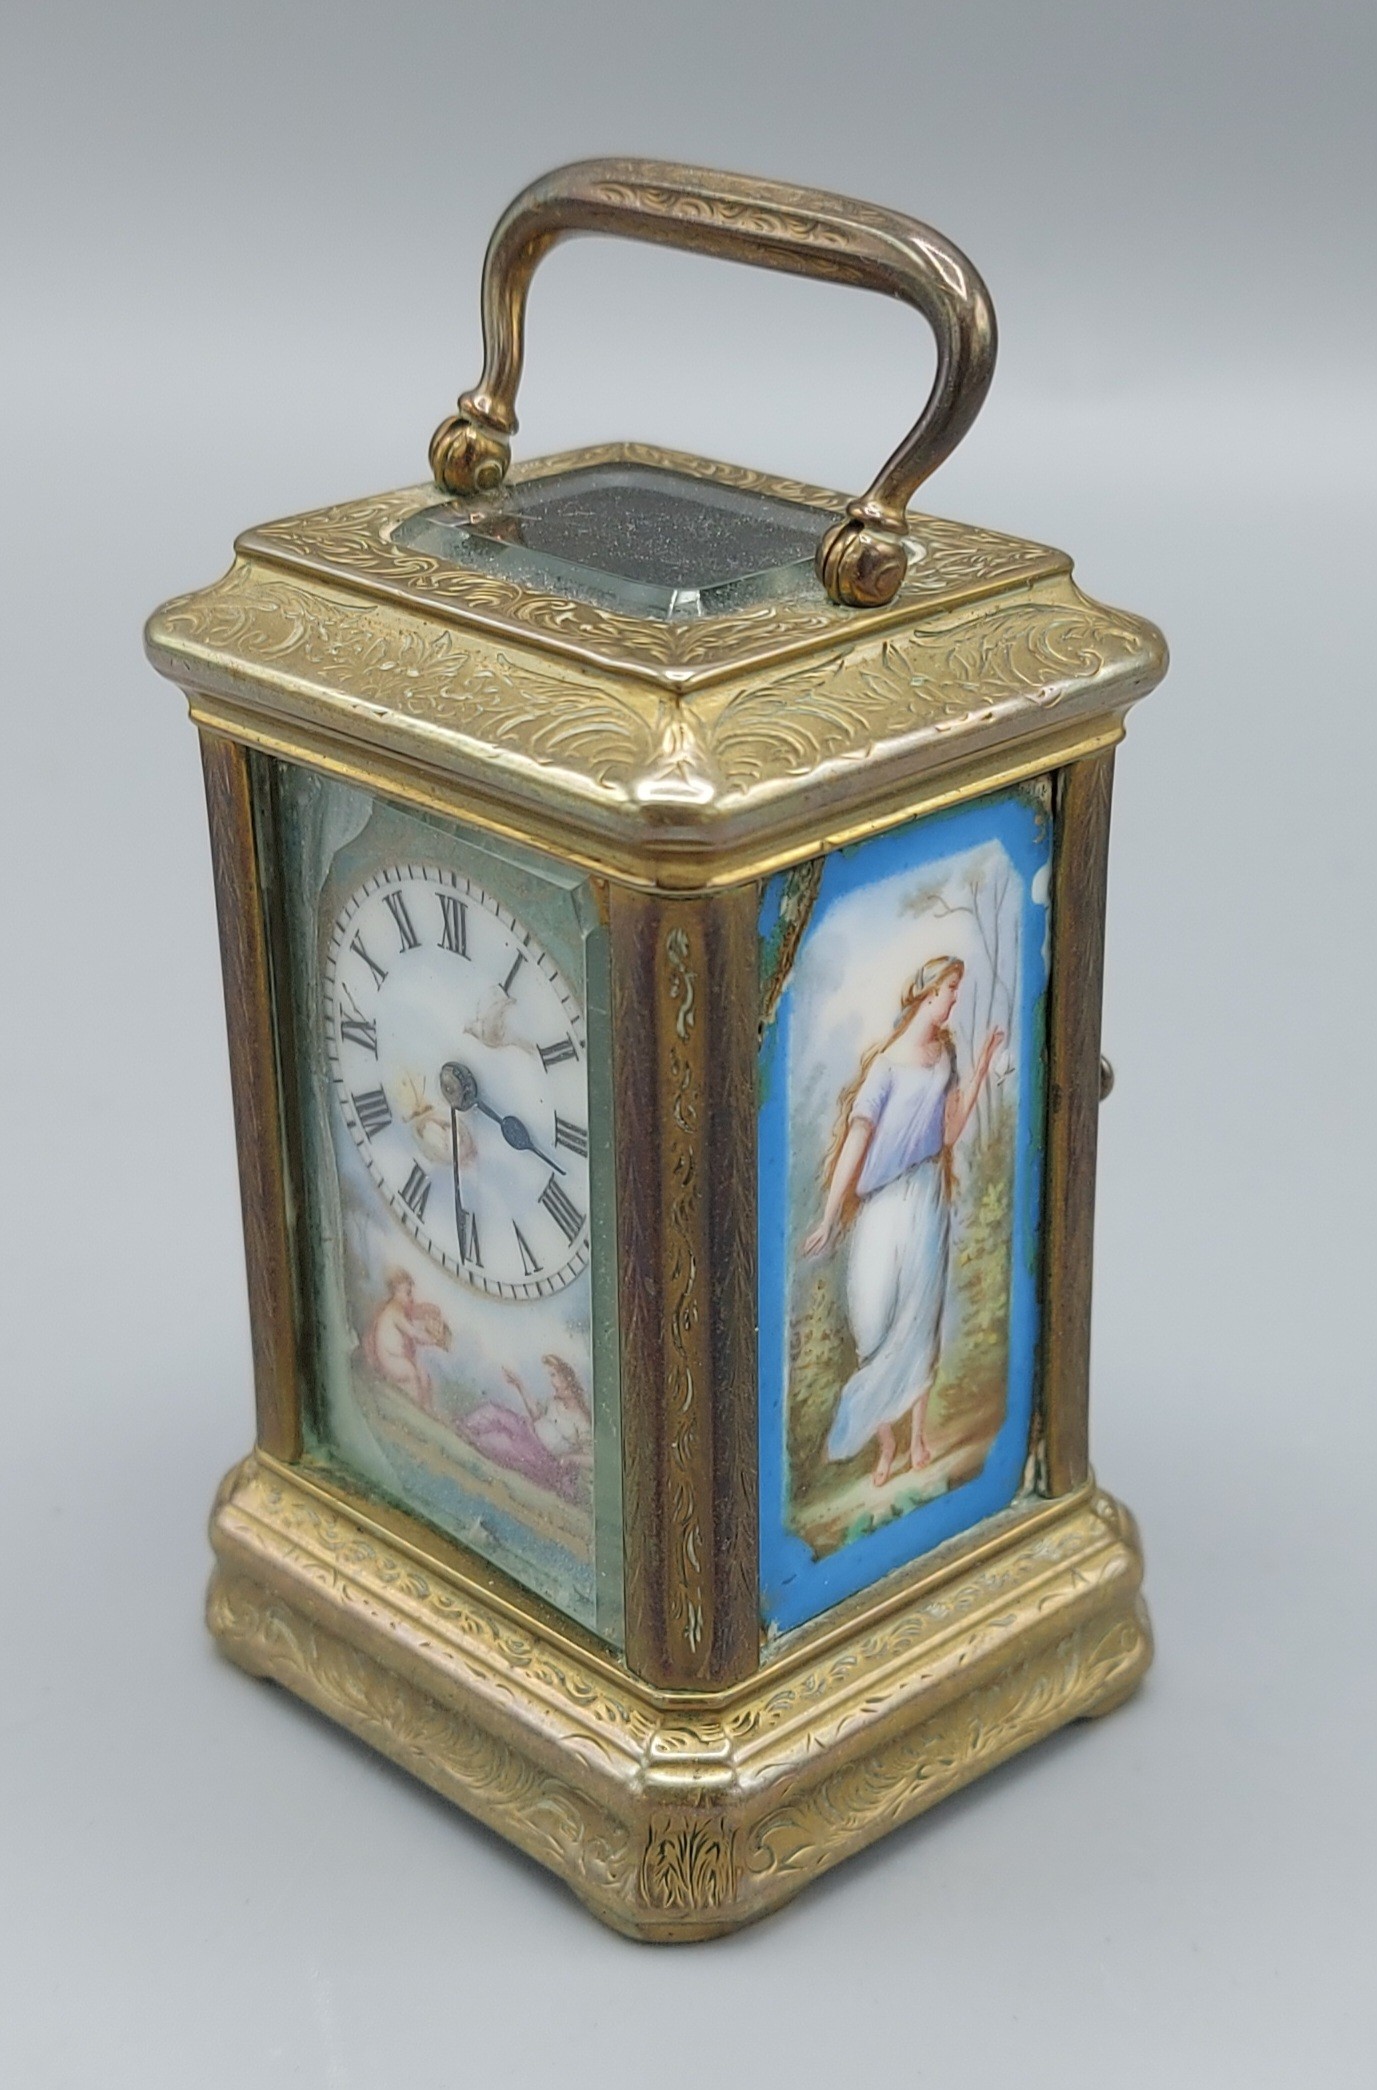 A French brass cased miniature Carriage clock with porcelain panels, lever escapement and carrying - Image 2 of 3